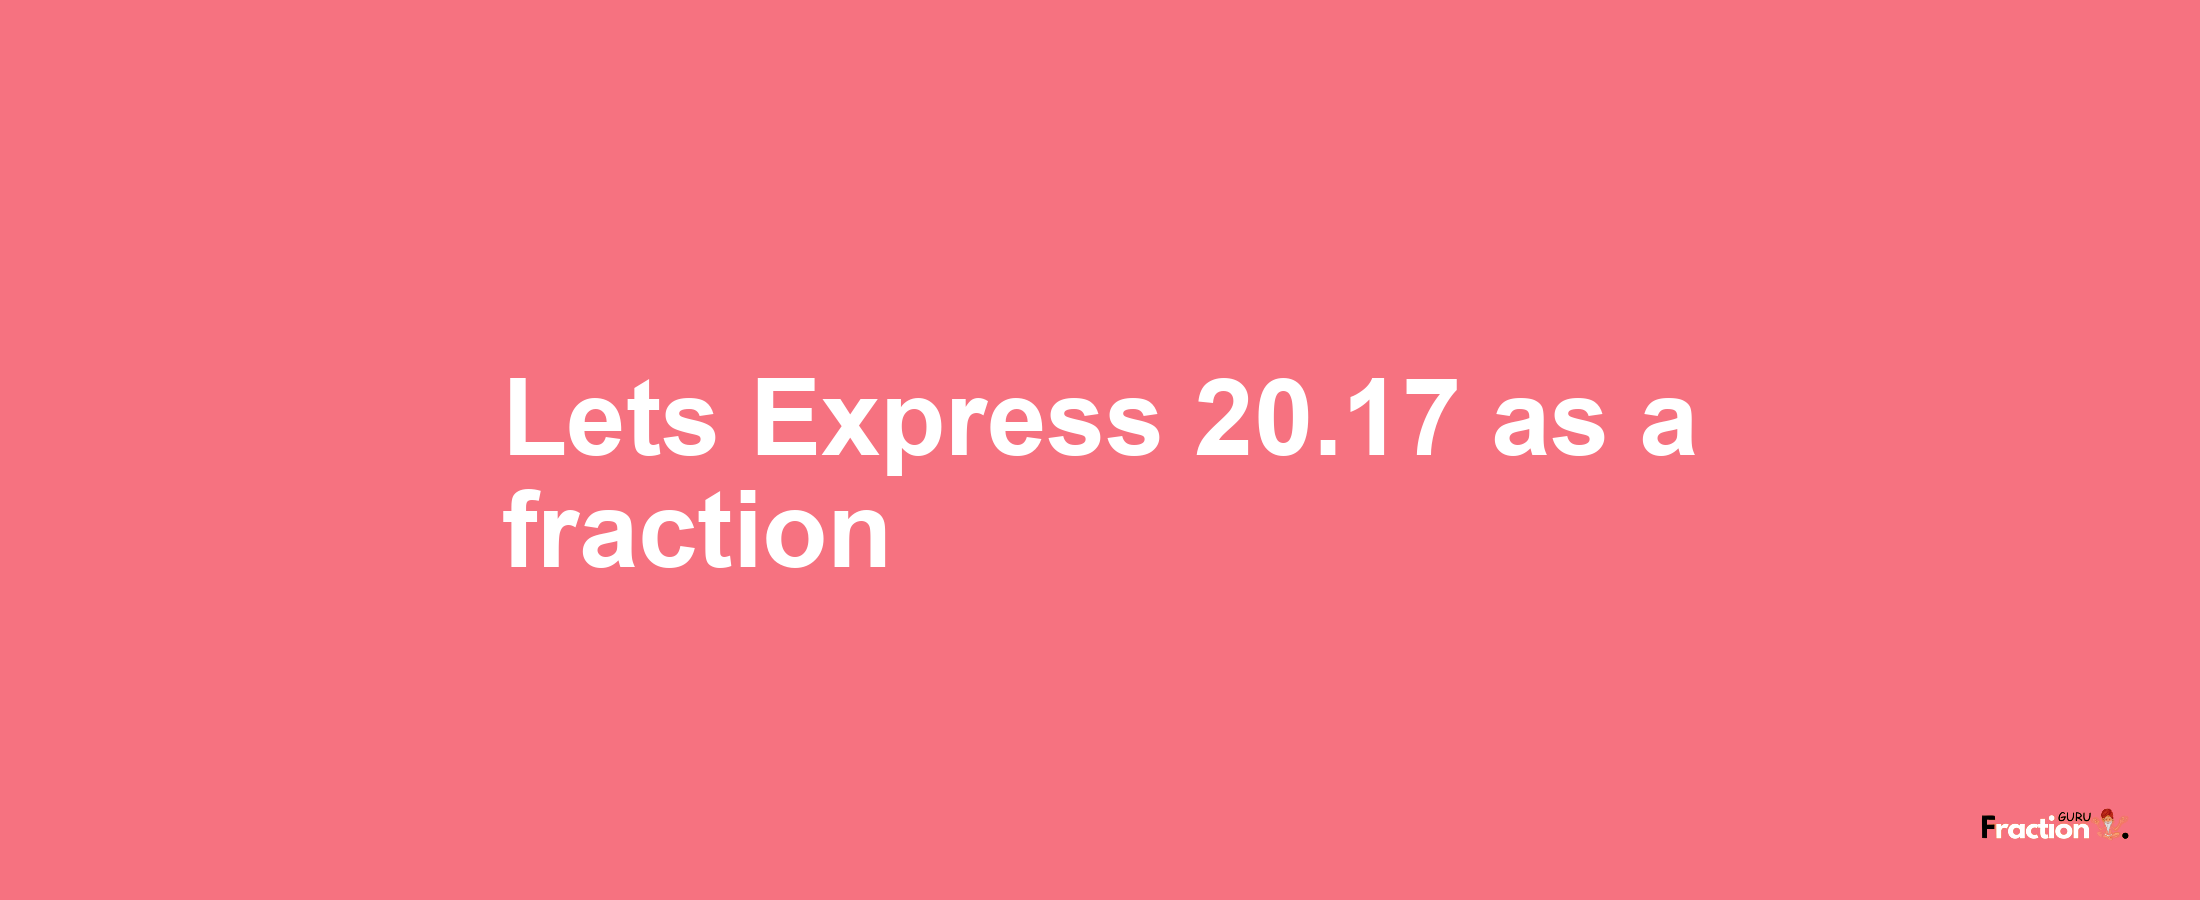 Lets Express 20.17 as afraction